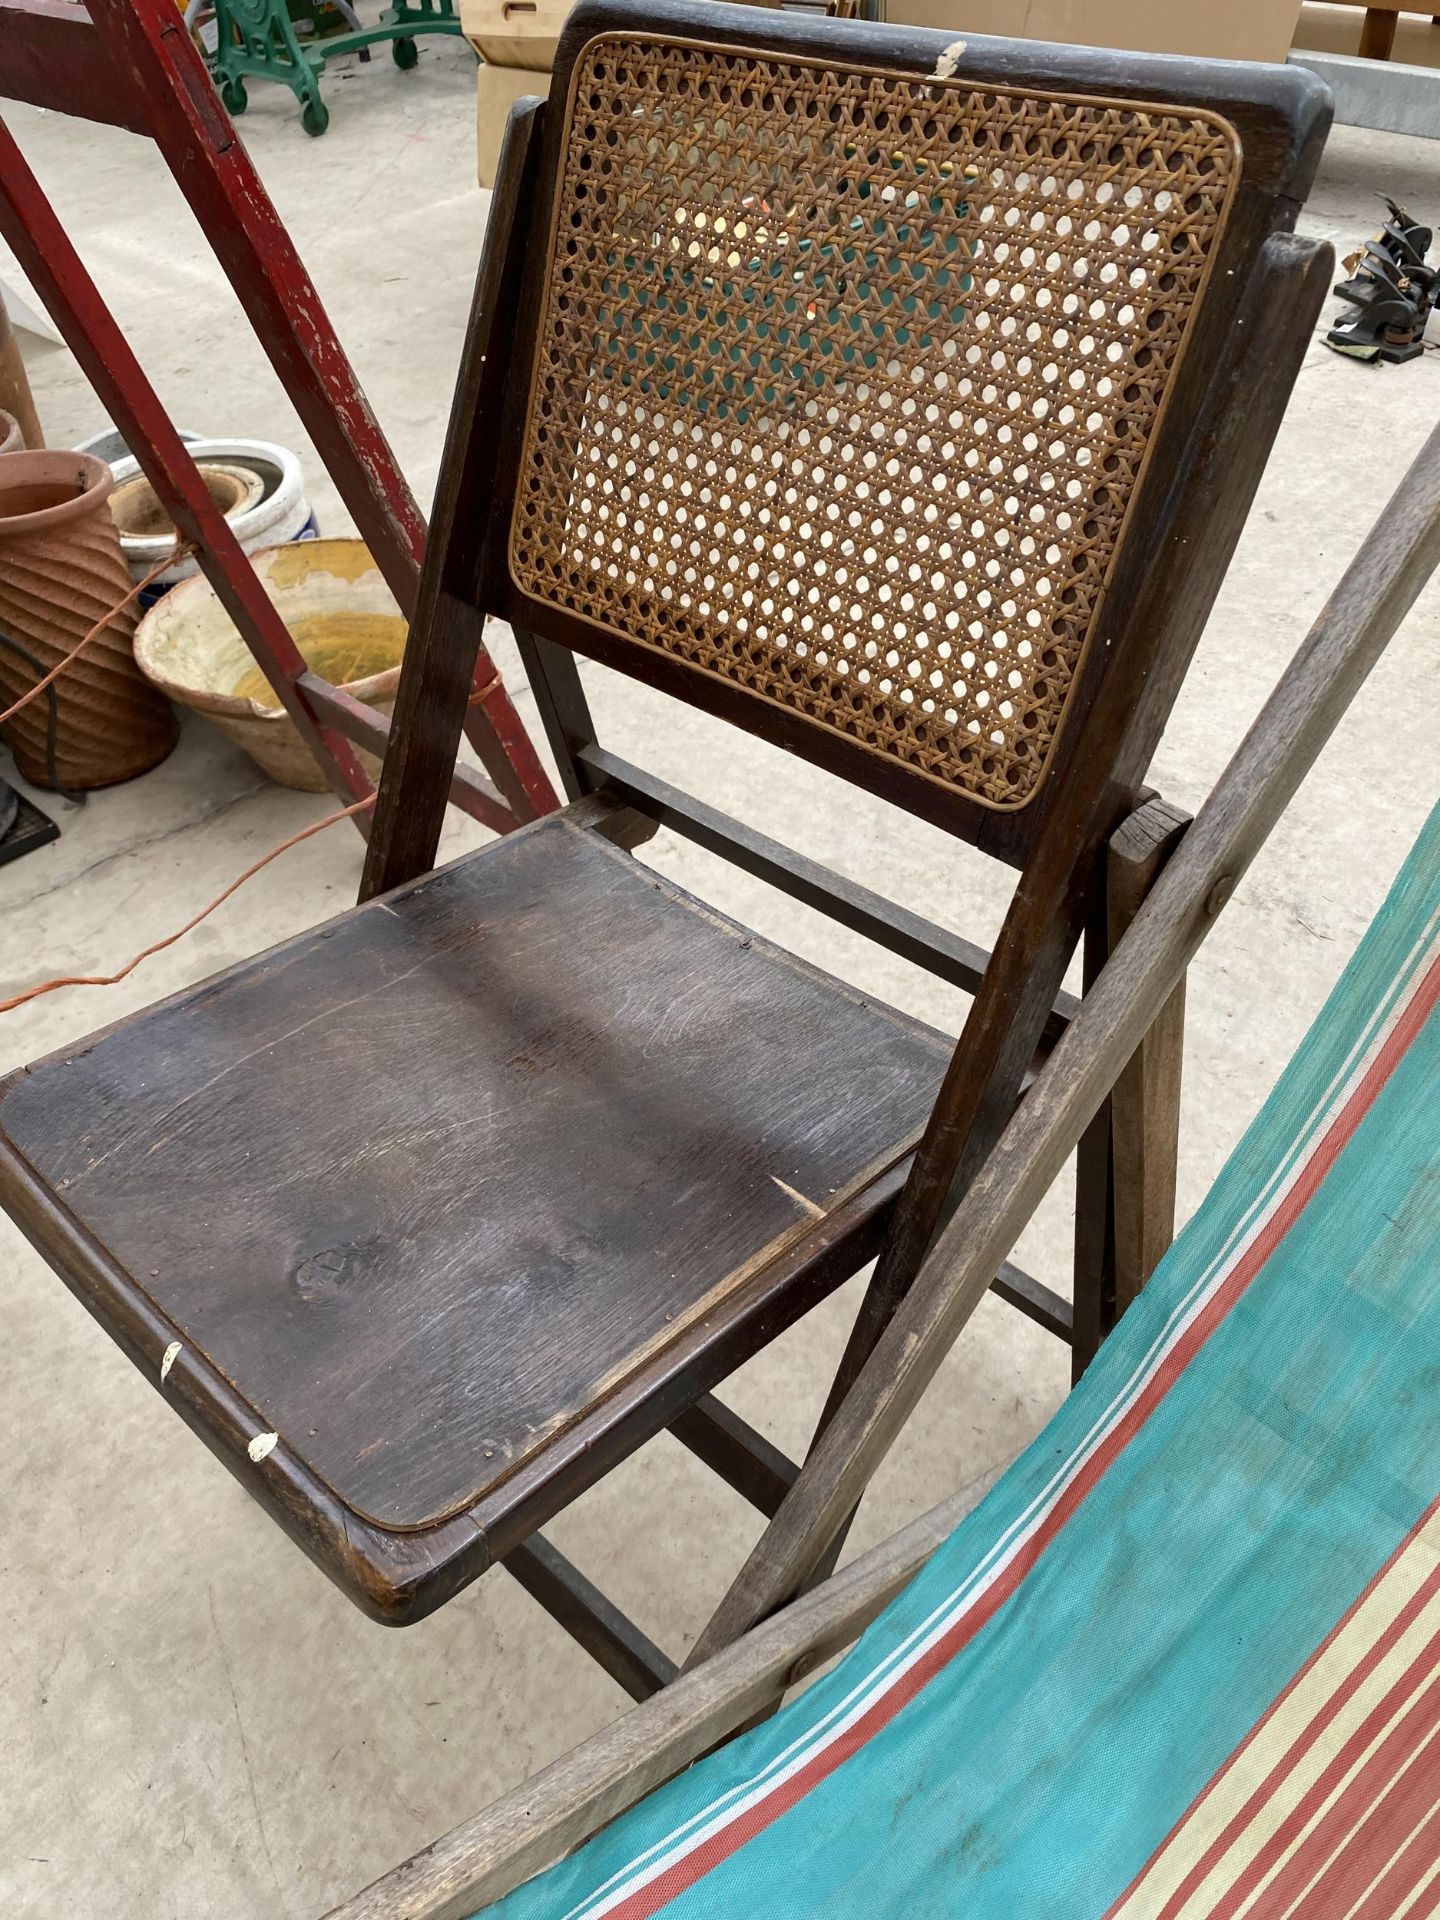 A FOLDING DECK CHAIR, A FURTHER FOLDING CHAIR AND A FOUR RUNG WOODEN STEP LADDER - Image 4 of 4